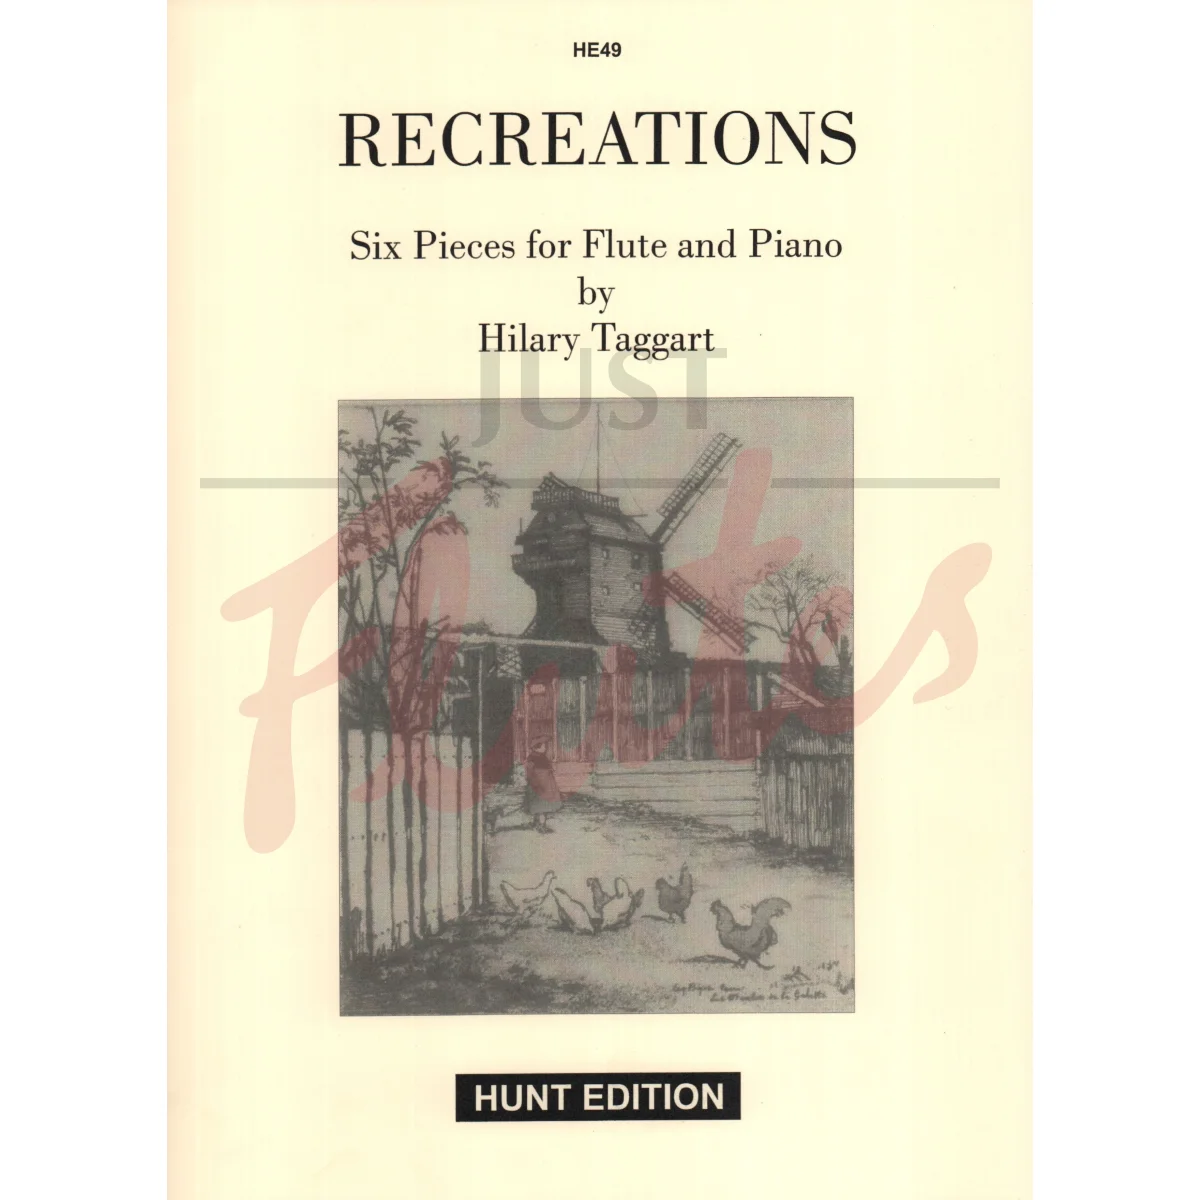 Recreations: Six Pieces for Flute and Piano